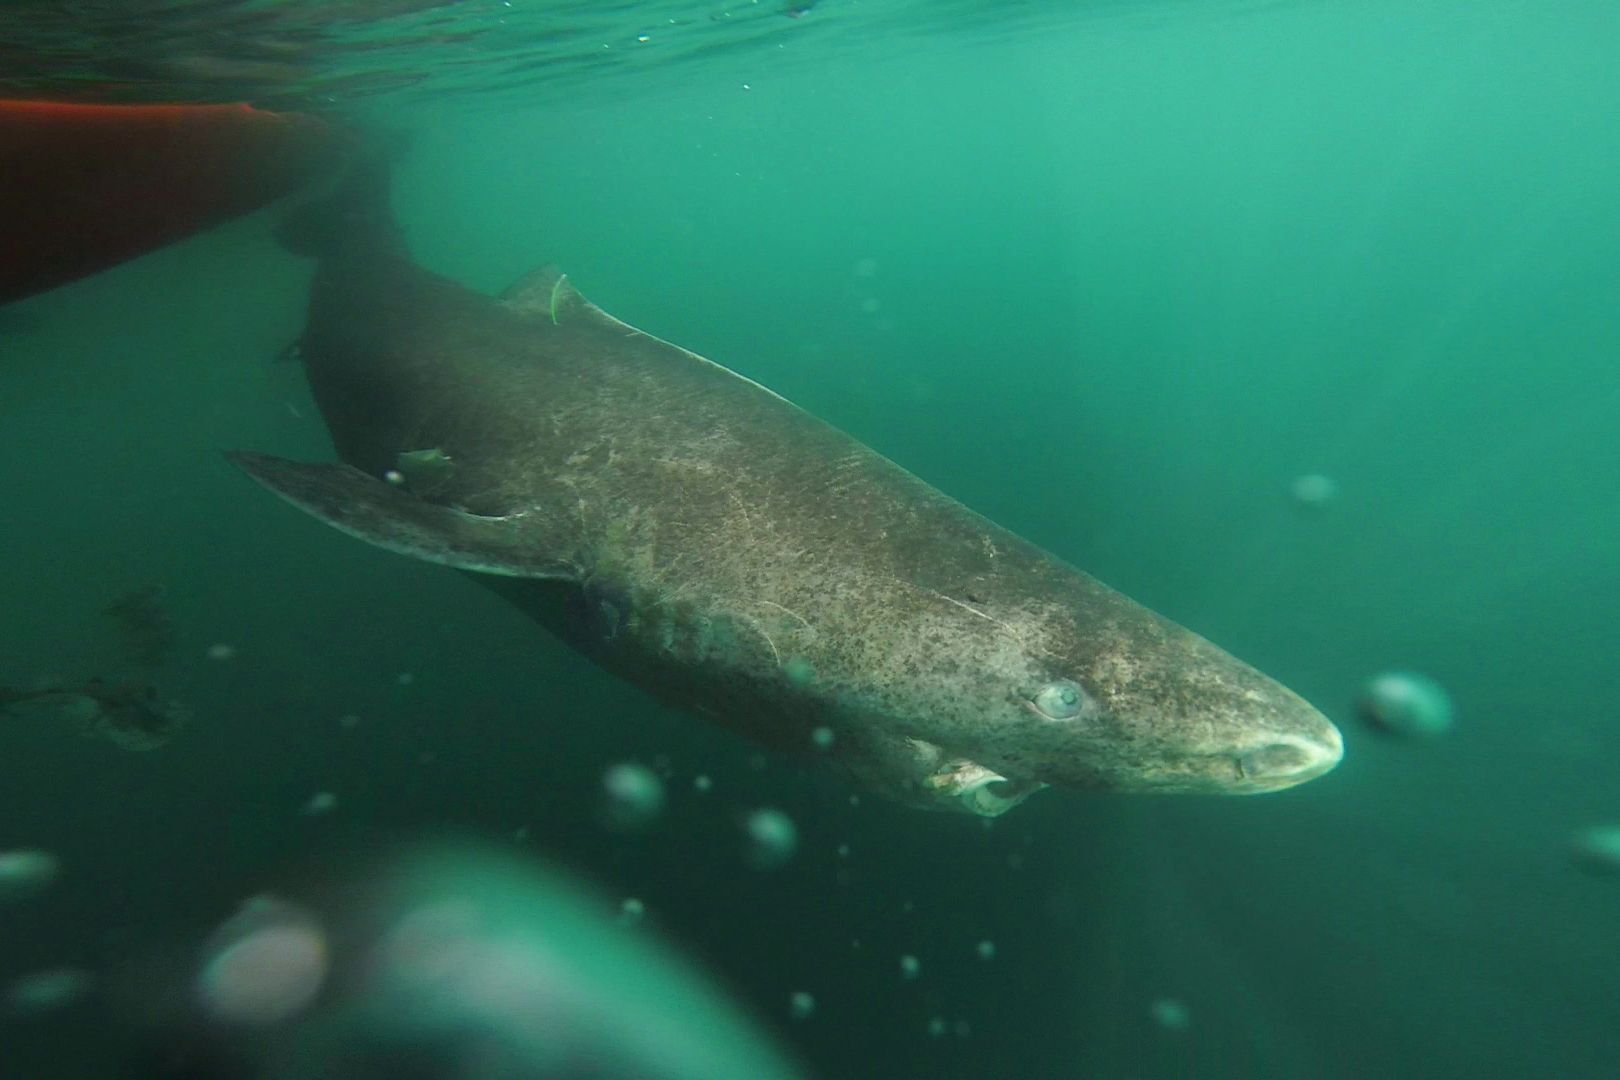 Greenland shark documented as being the oldest living vertebrate